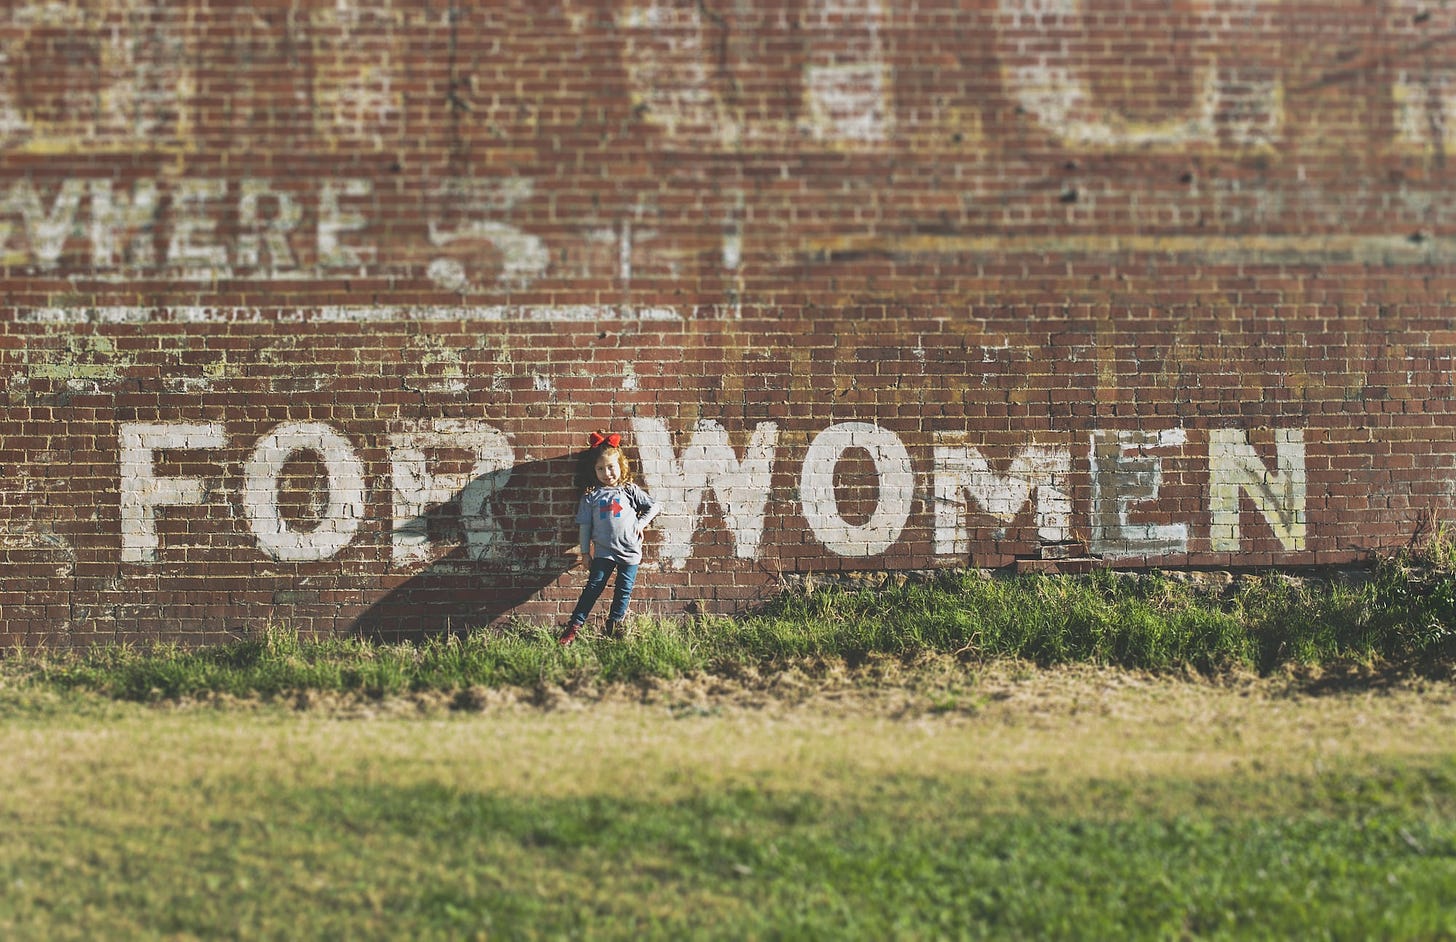 It was election day, 2016. Every single day on the way to school in this really old neighborhood of Clarksburg, we passed this faded ad painted on this brick building, and I knew that this day was going to be the day to snap a photo. That’s my daughter. The day ended much different than it started, but this moment was perfect.